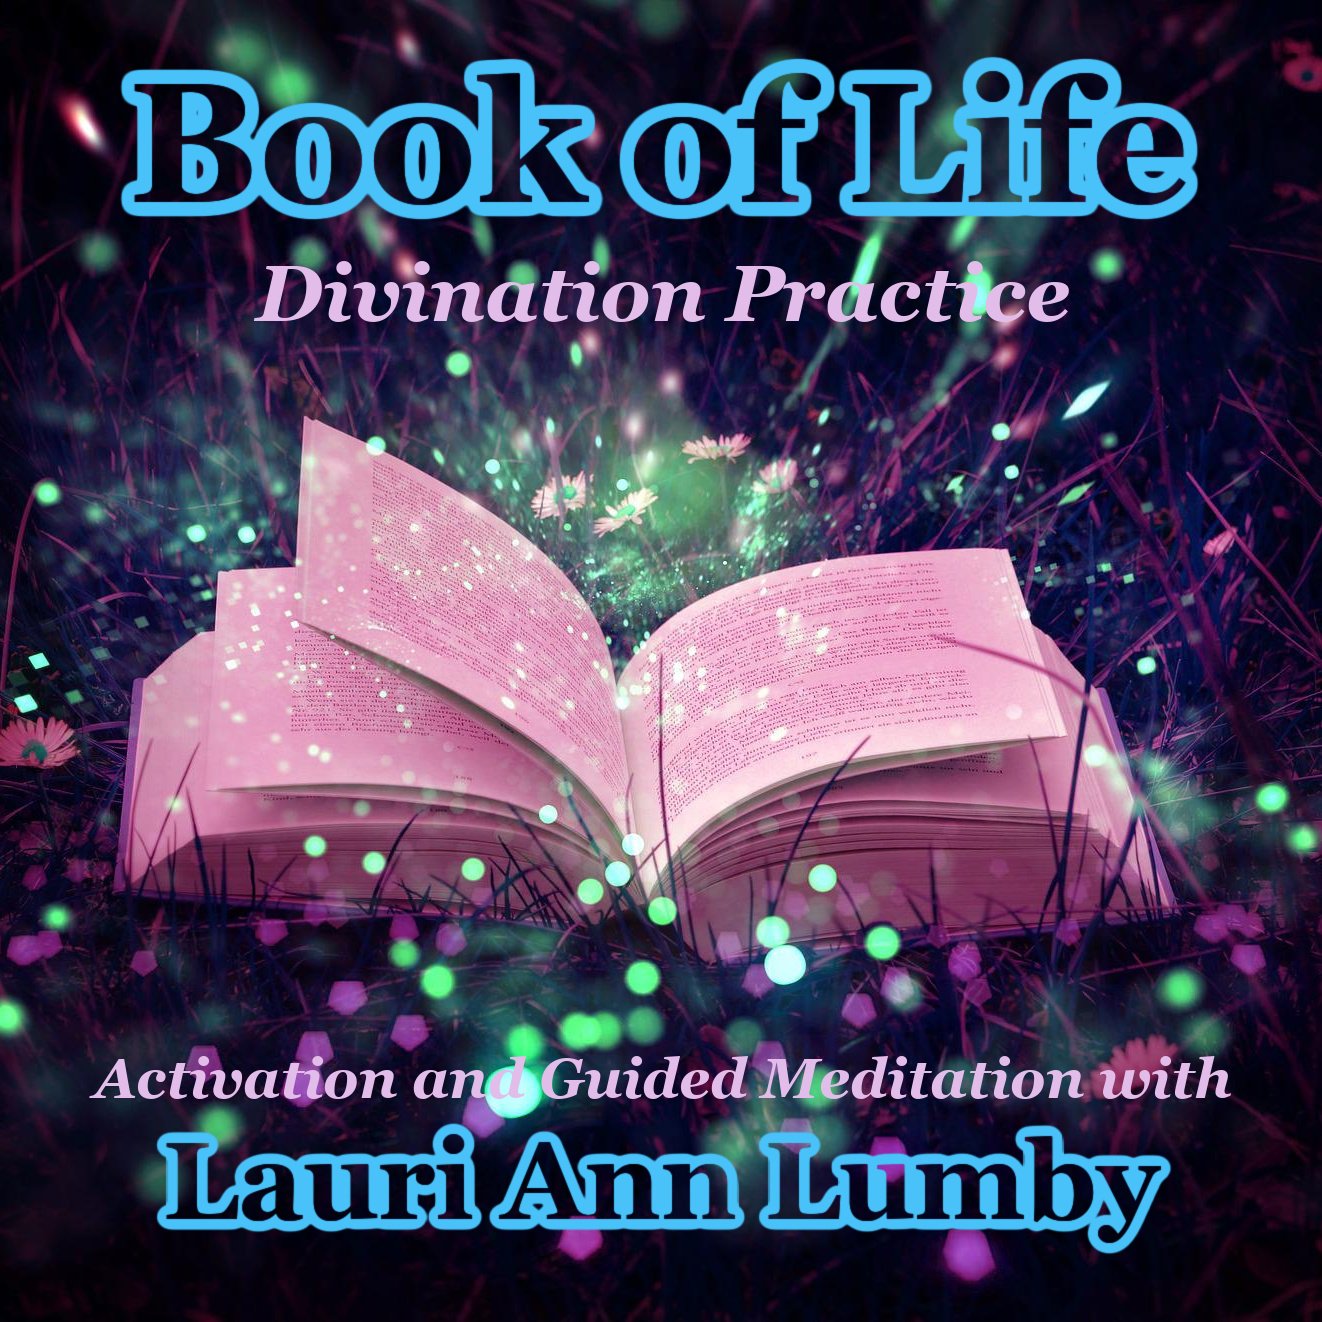 Book of Life Divination Practice